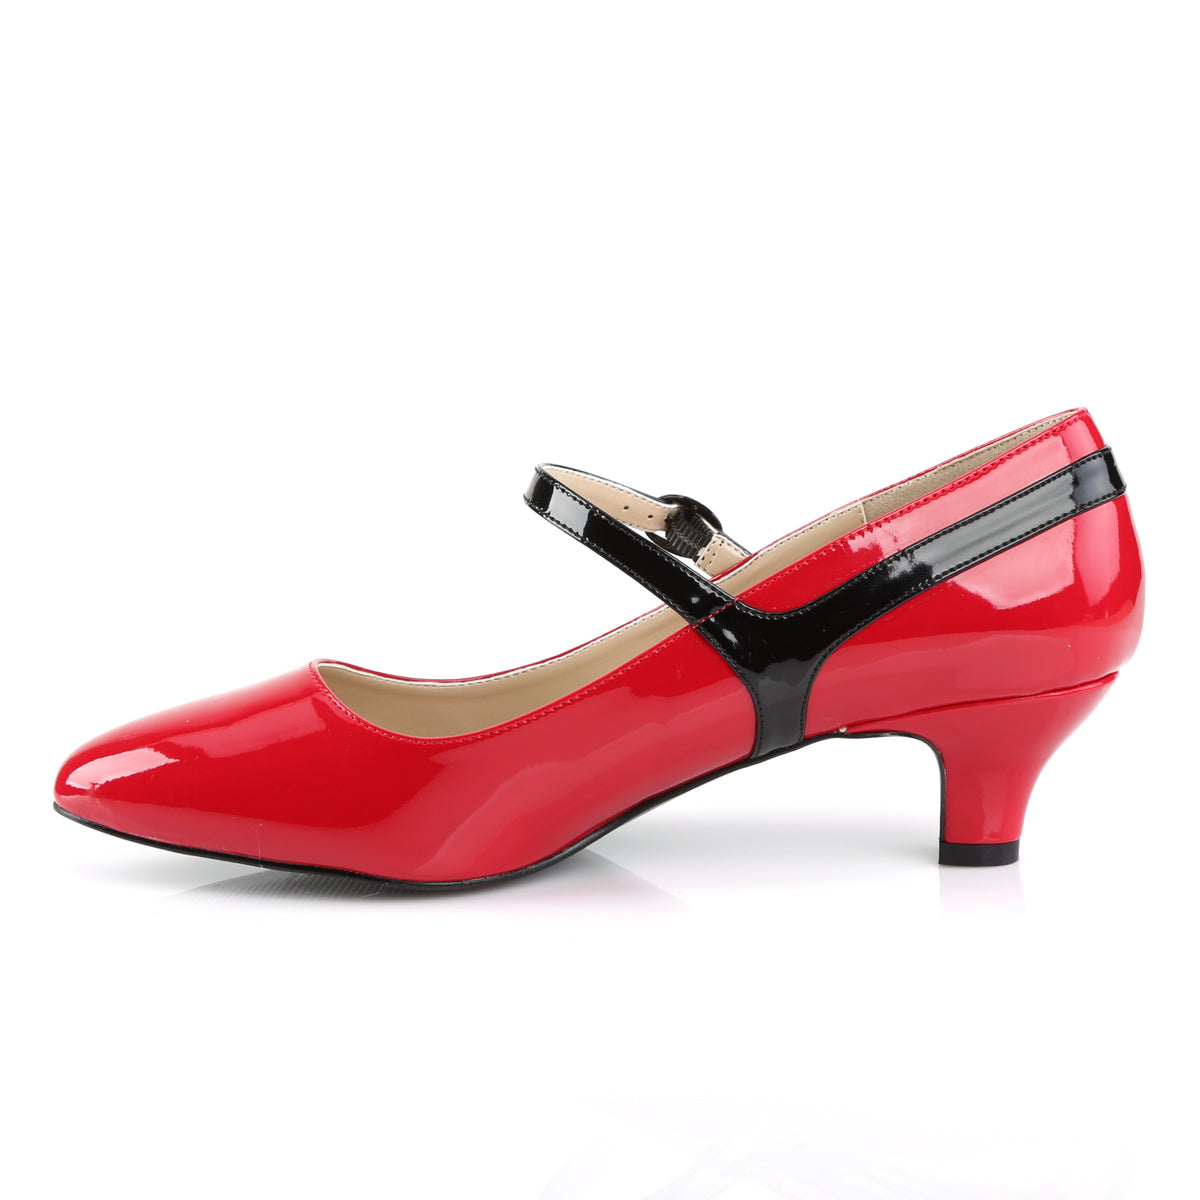 Pleaser Pink Label Womens Pumps FAB-425 Red-Blk Pat